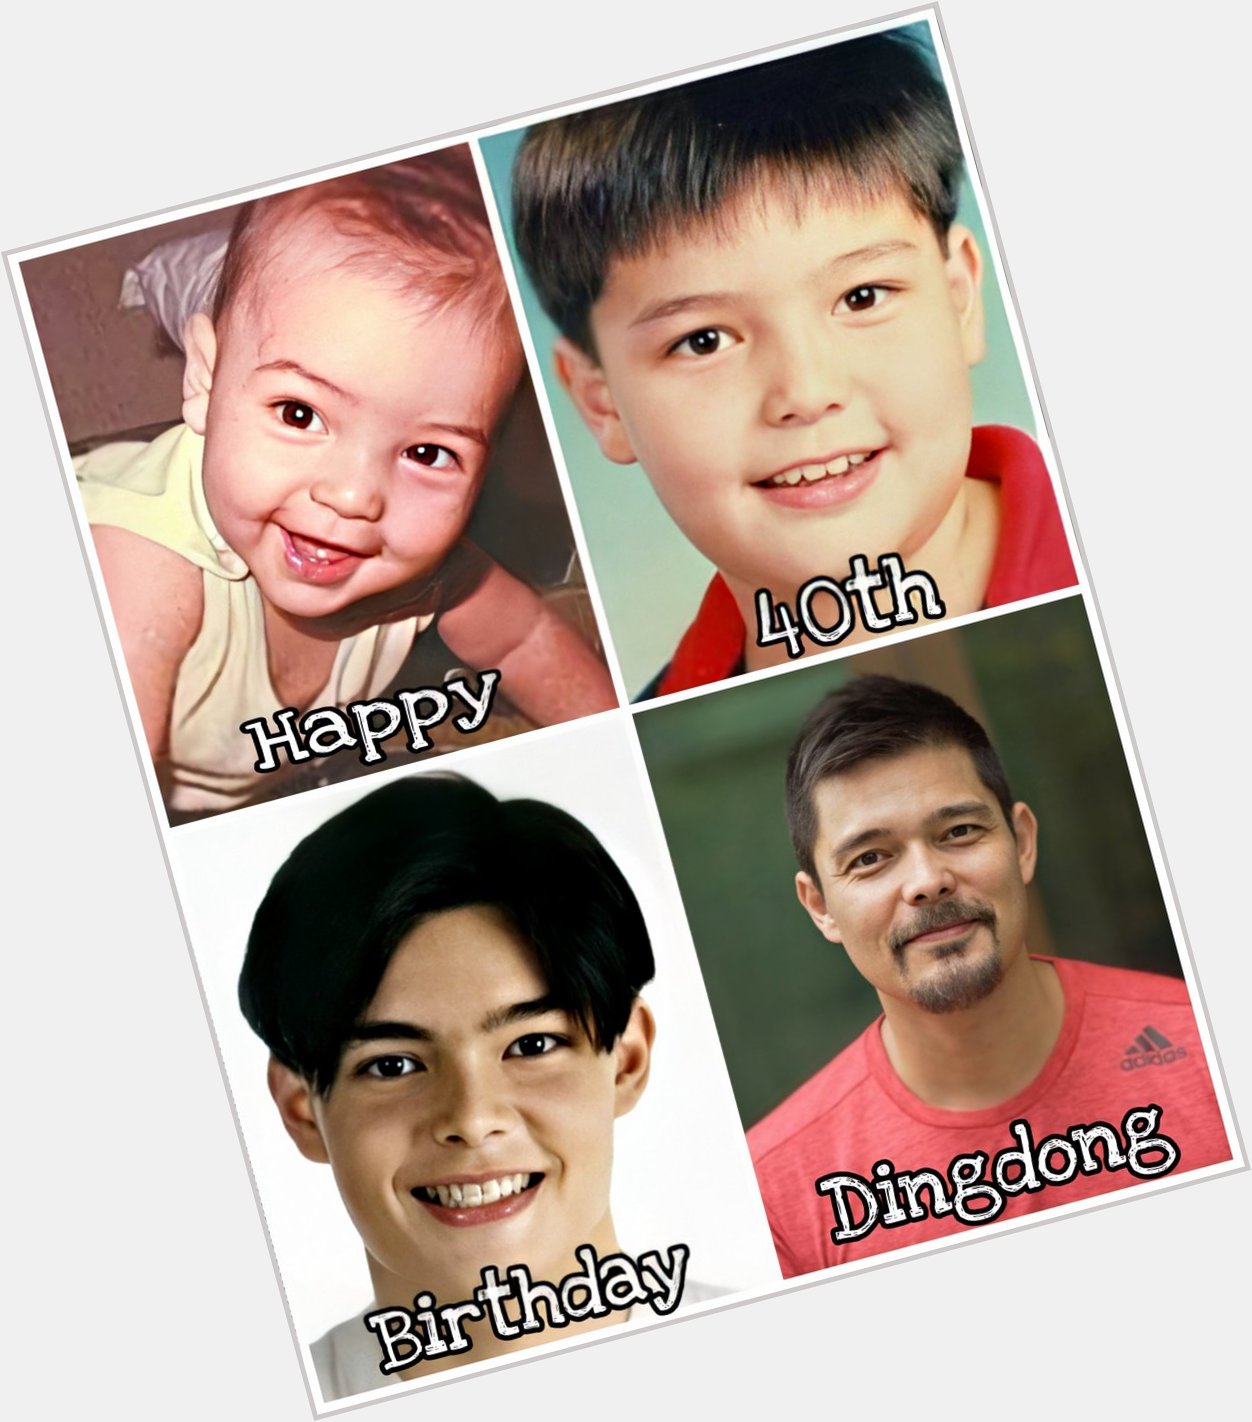 Happy Birthday Kapuso Primetime King Dingdong Dantes

Enjoy your day to the fullest! We love you 